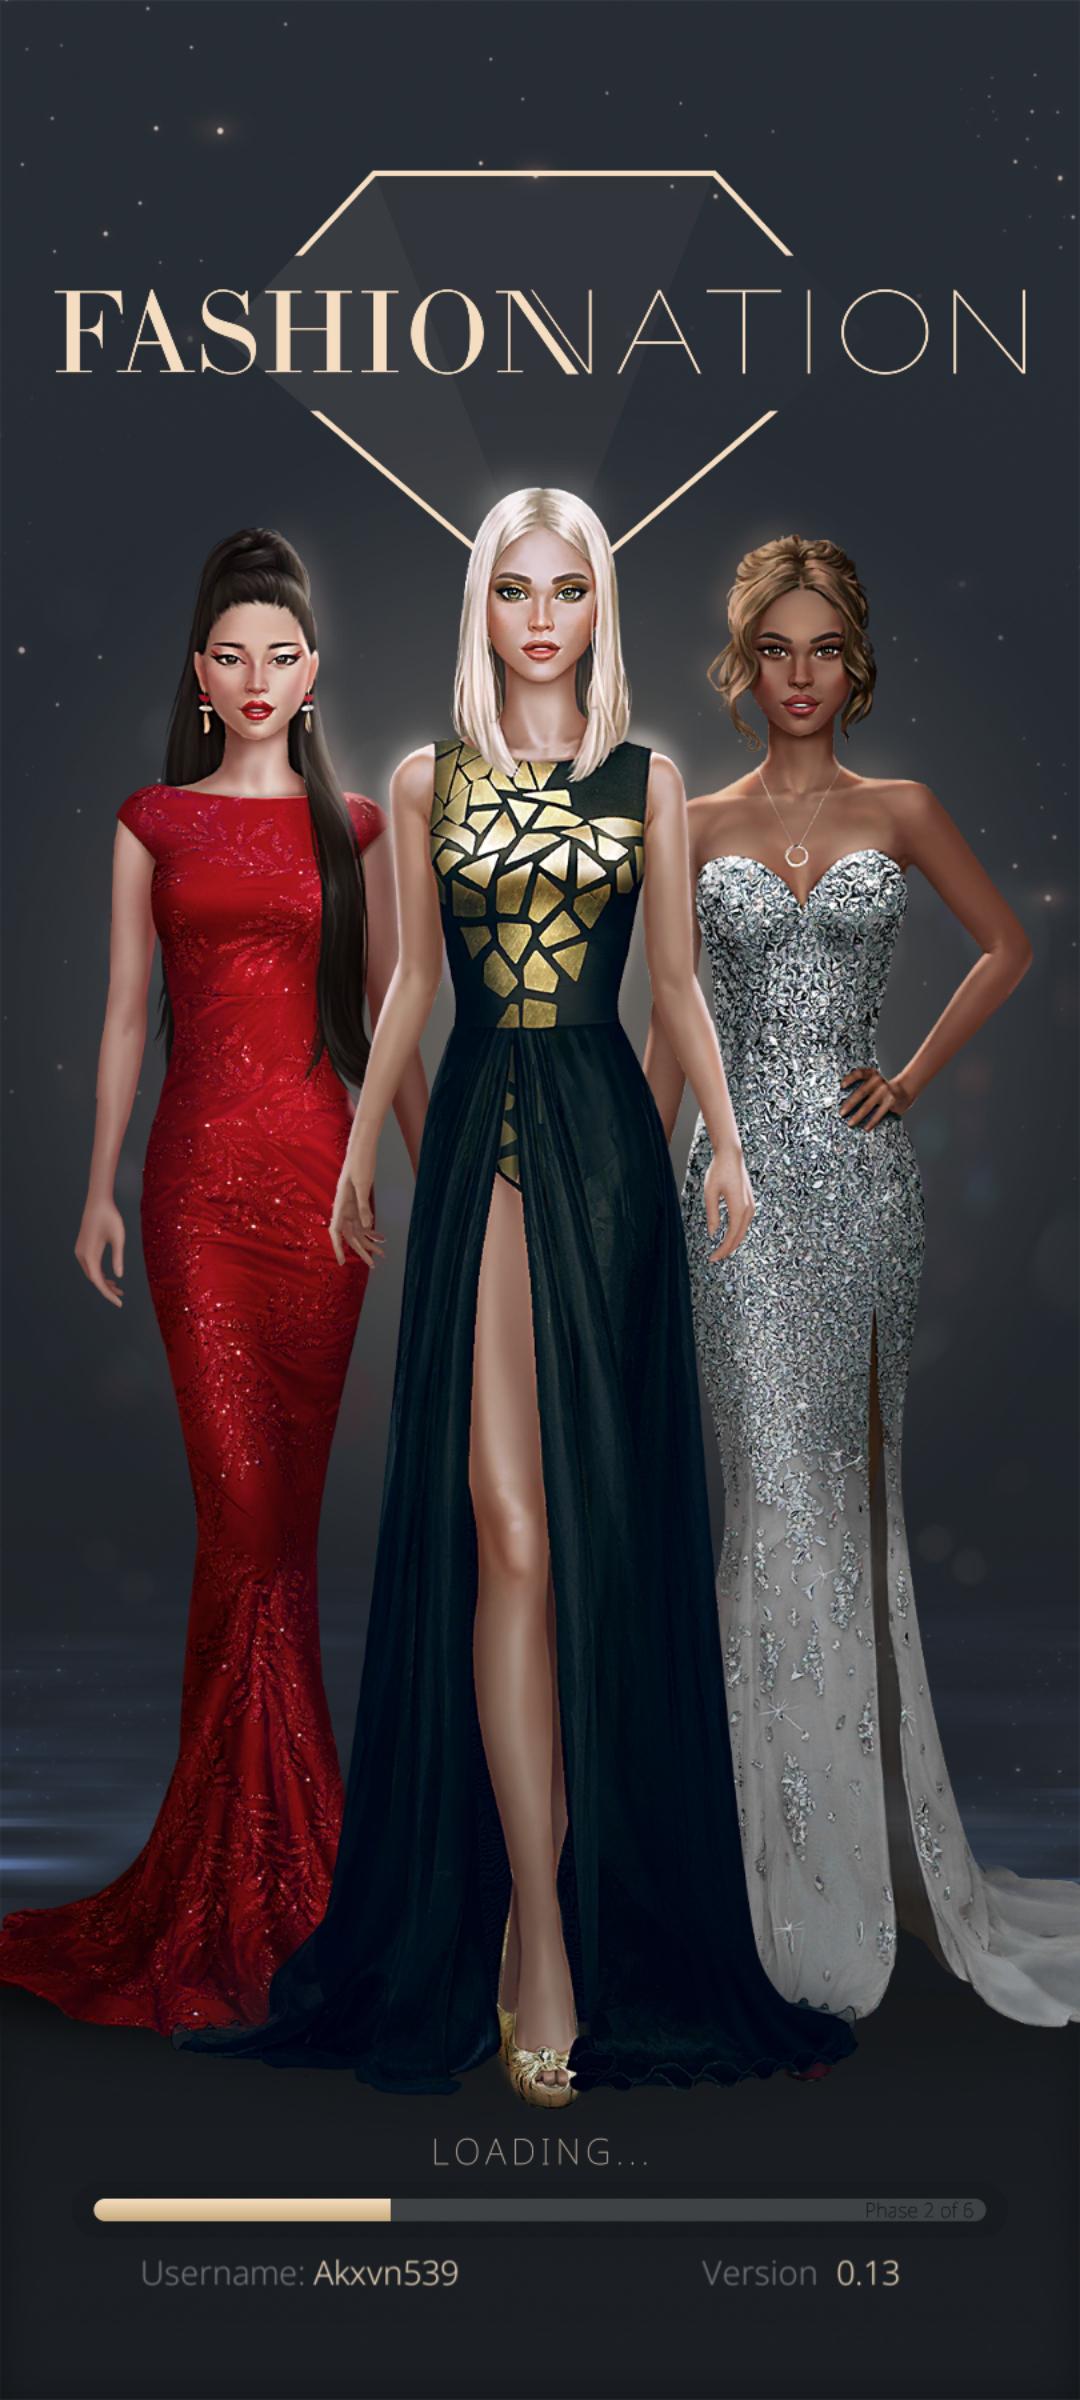 Is this game made by Covet Fashion Nation Or its a rip off of